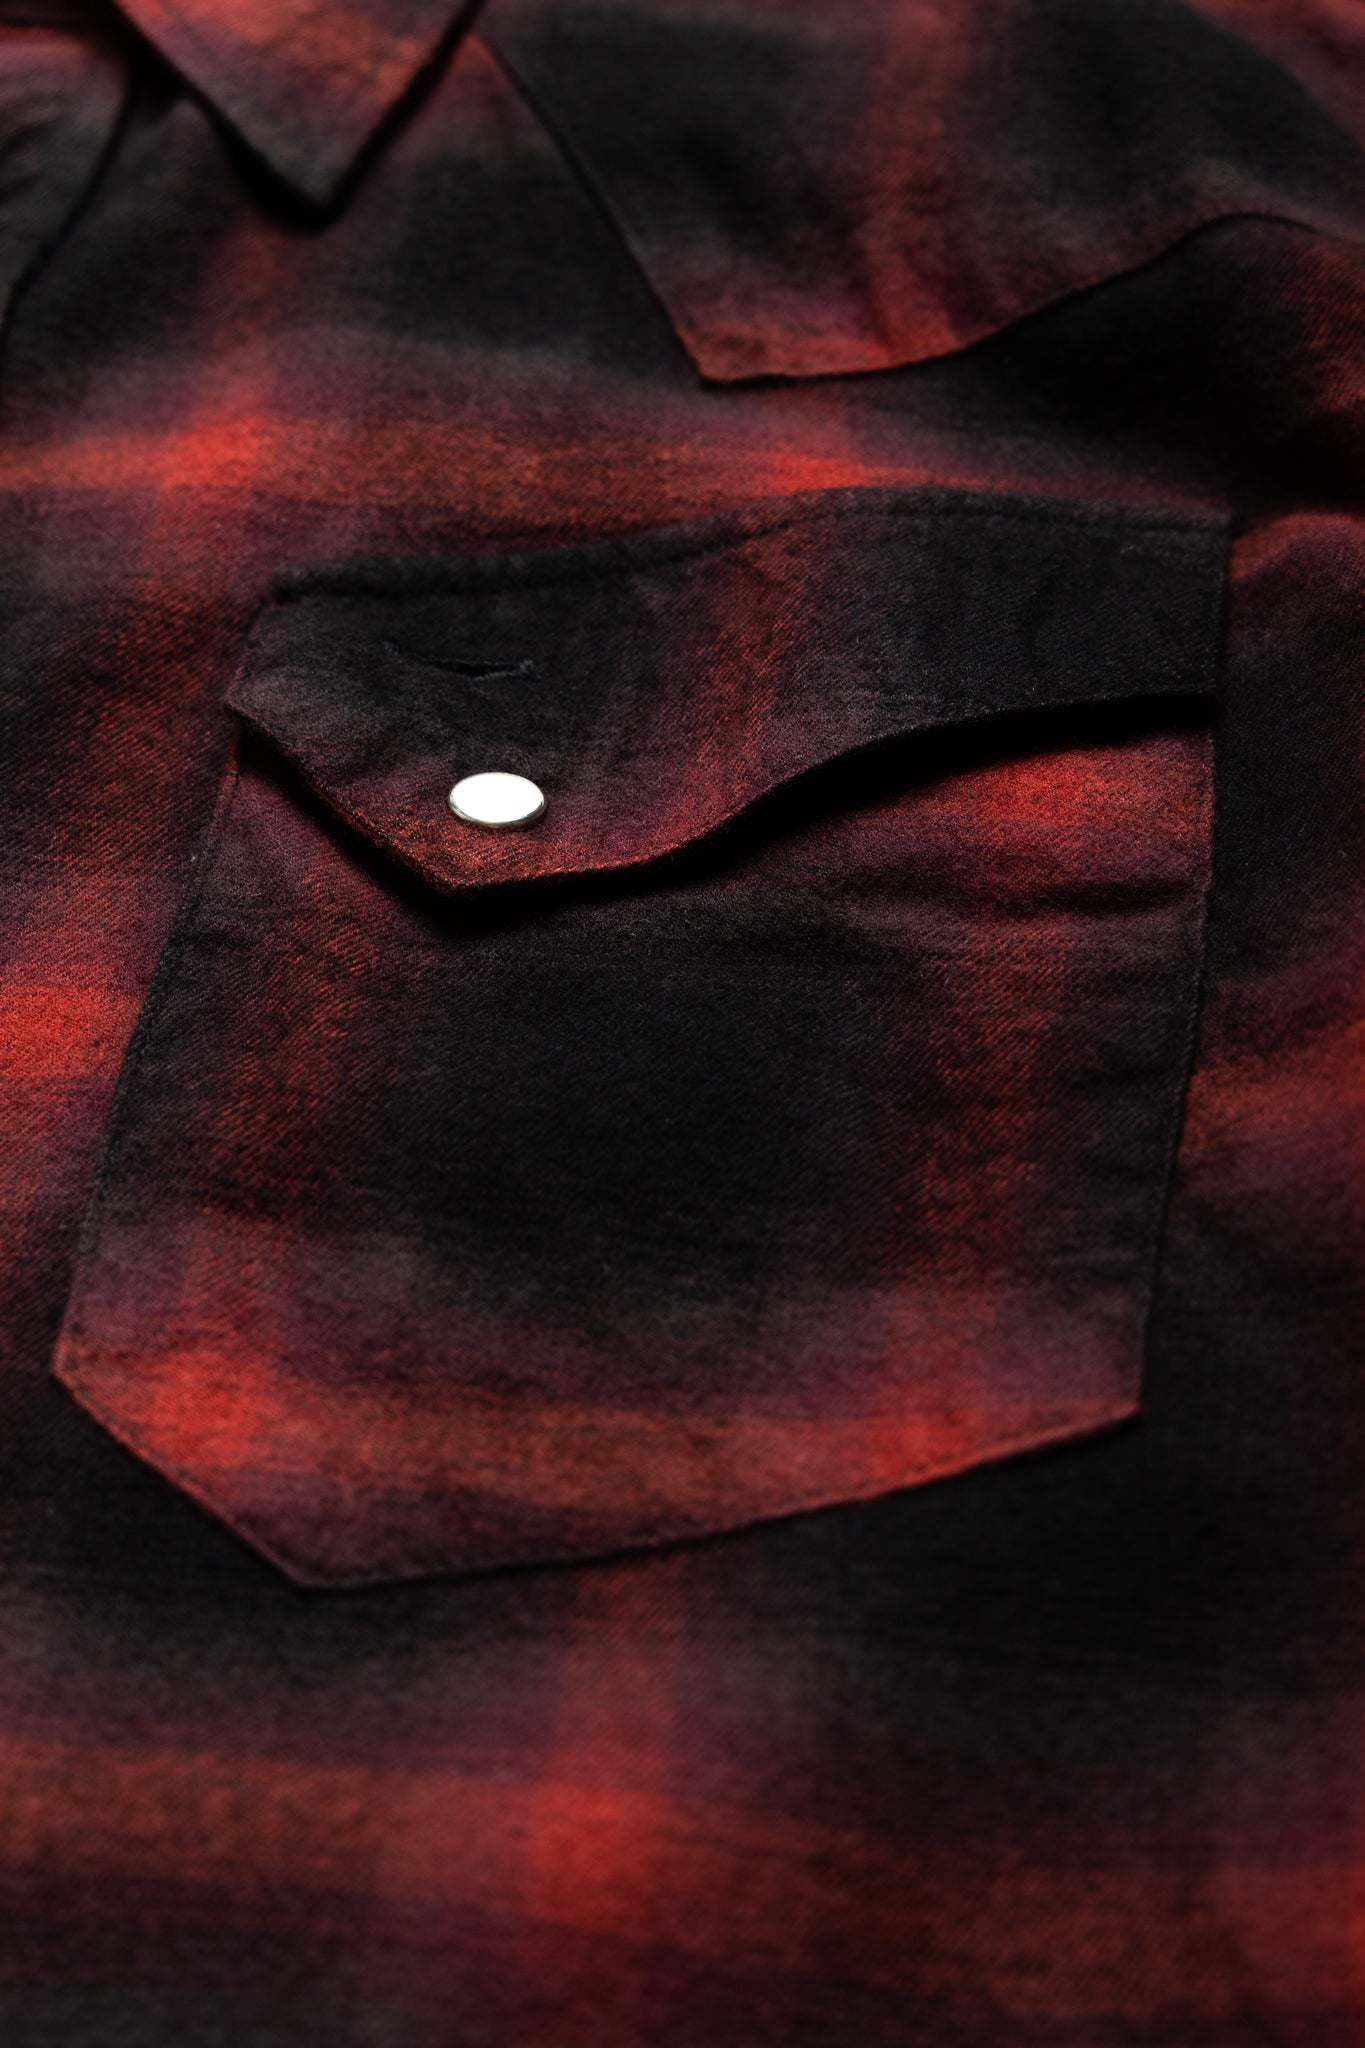 Cotton Rayon Ombre Check Western Shirt - Red